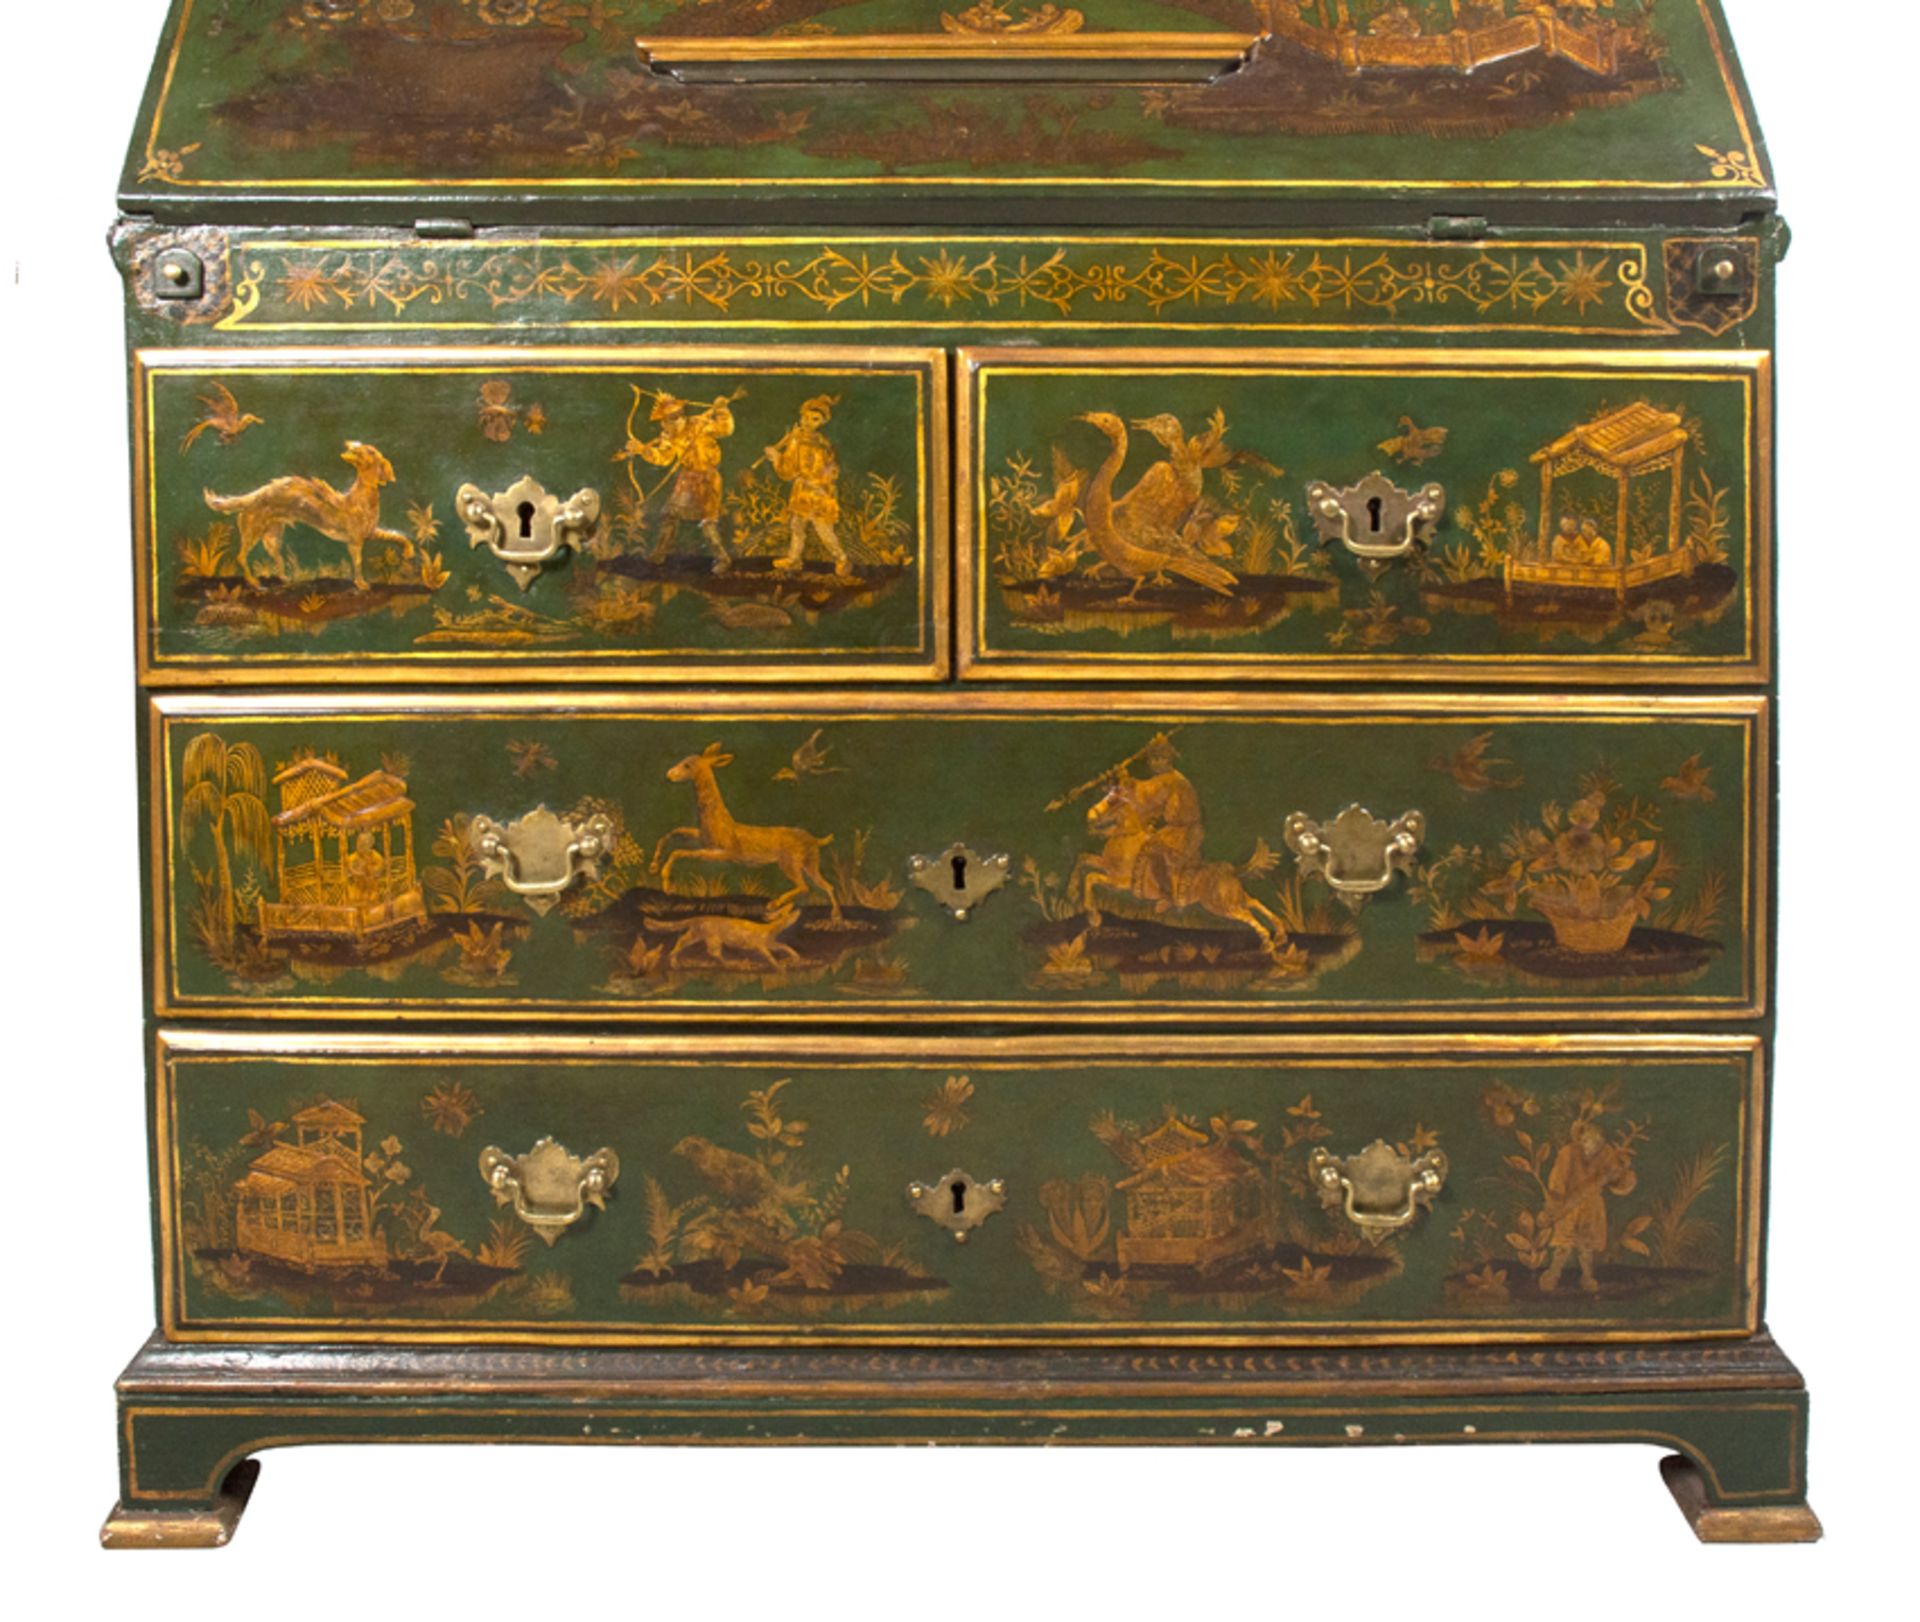 Carved, lacquered and gilded wooden cabinet with Chinese-style decoration England. 19th century. - Bild 5 aus 11